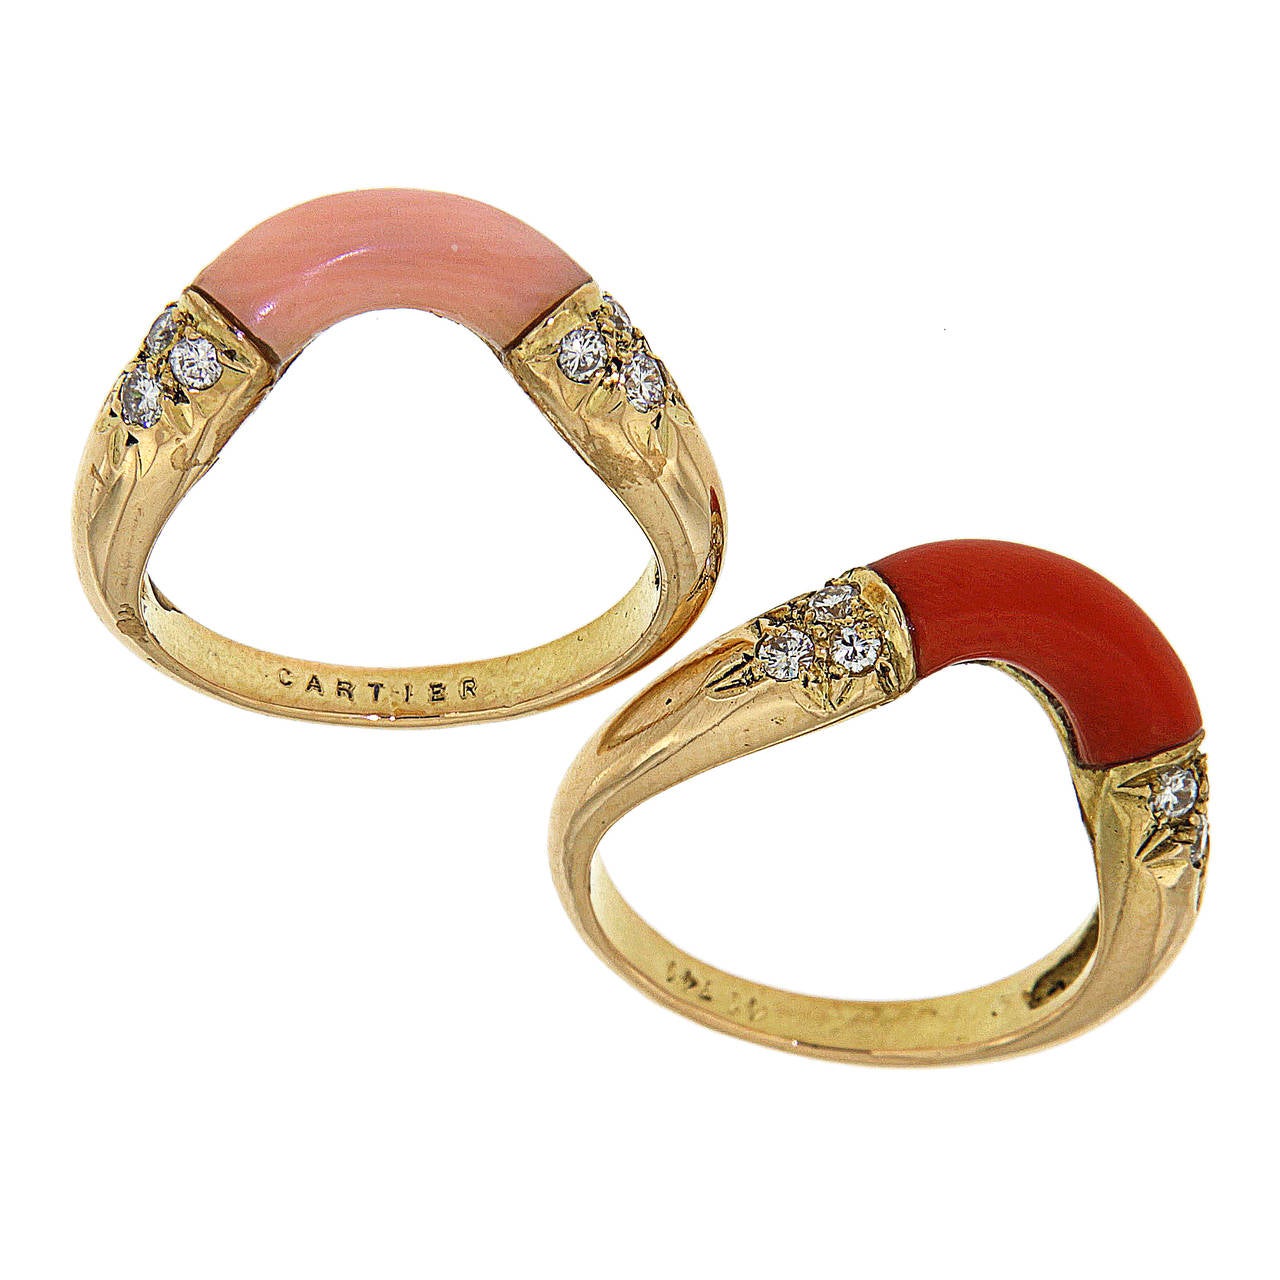 Stylish Cartier rings crafted in 18k yellow gold with Rose and Red Coral Stones and Diamonds total approximately 0.25 ctw, Finger Size 6.5